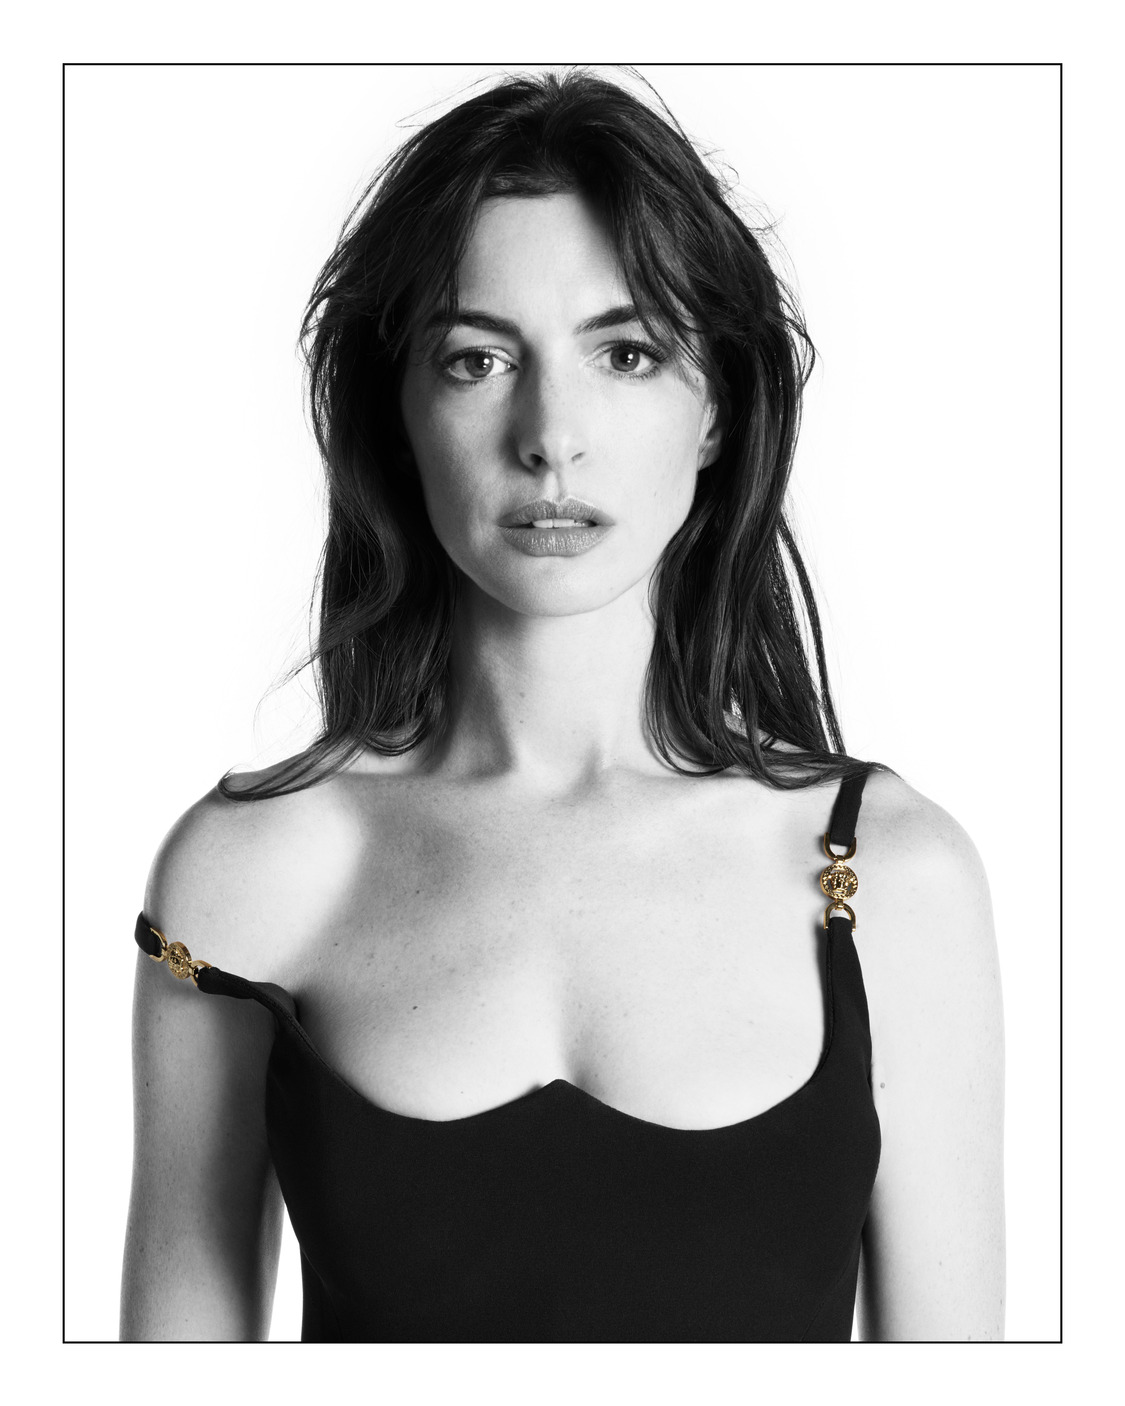 Anne Hathaway turns "black swan" in Versace's latest collection – Versace icons